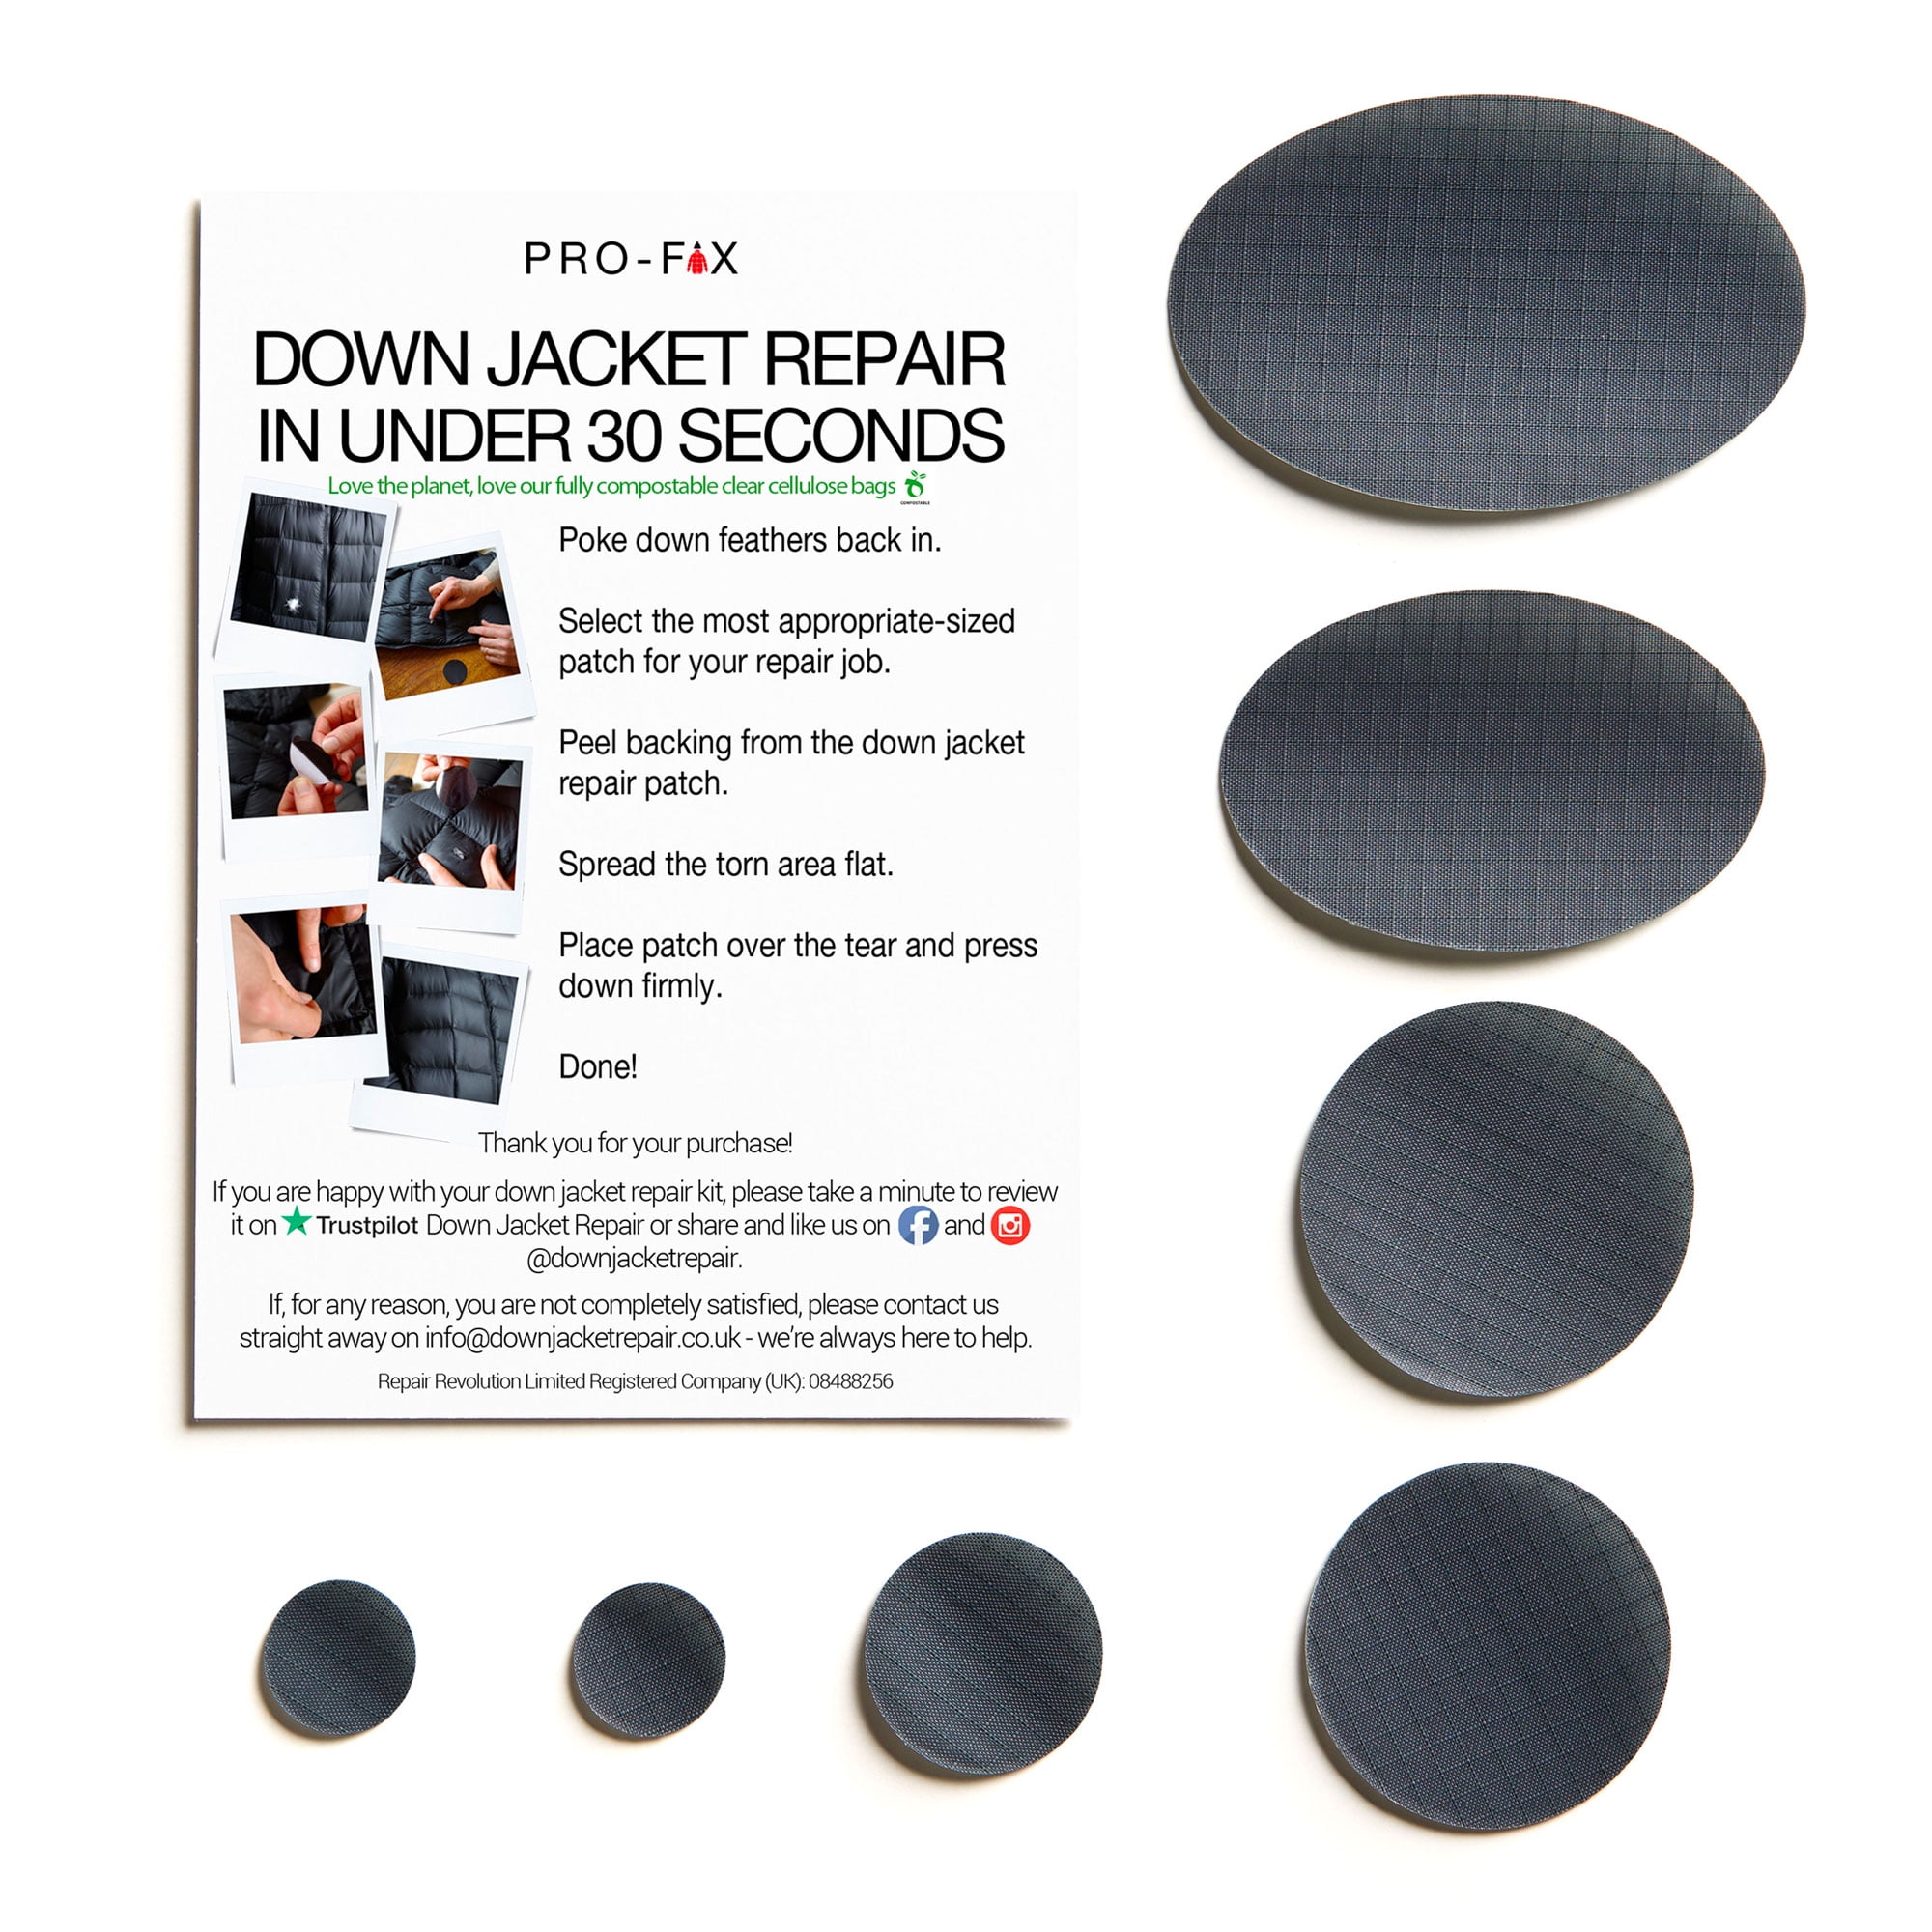 Down Jacket Repair Patch Fabric Stickers Clothes Patches Self